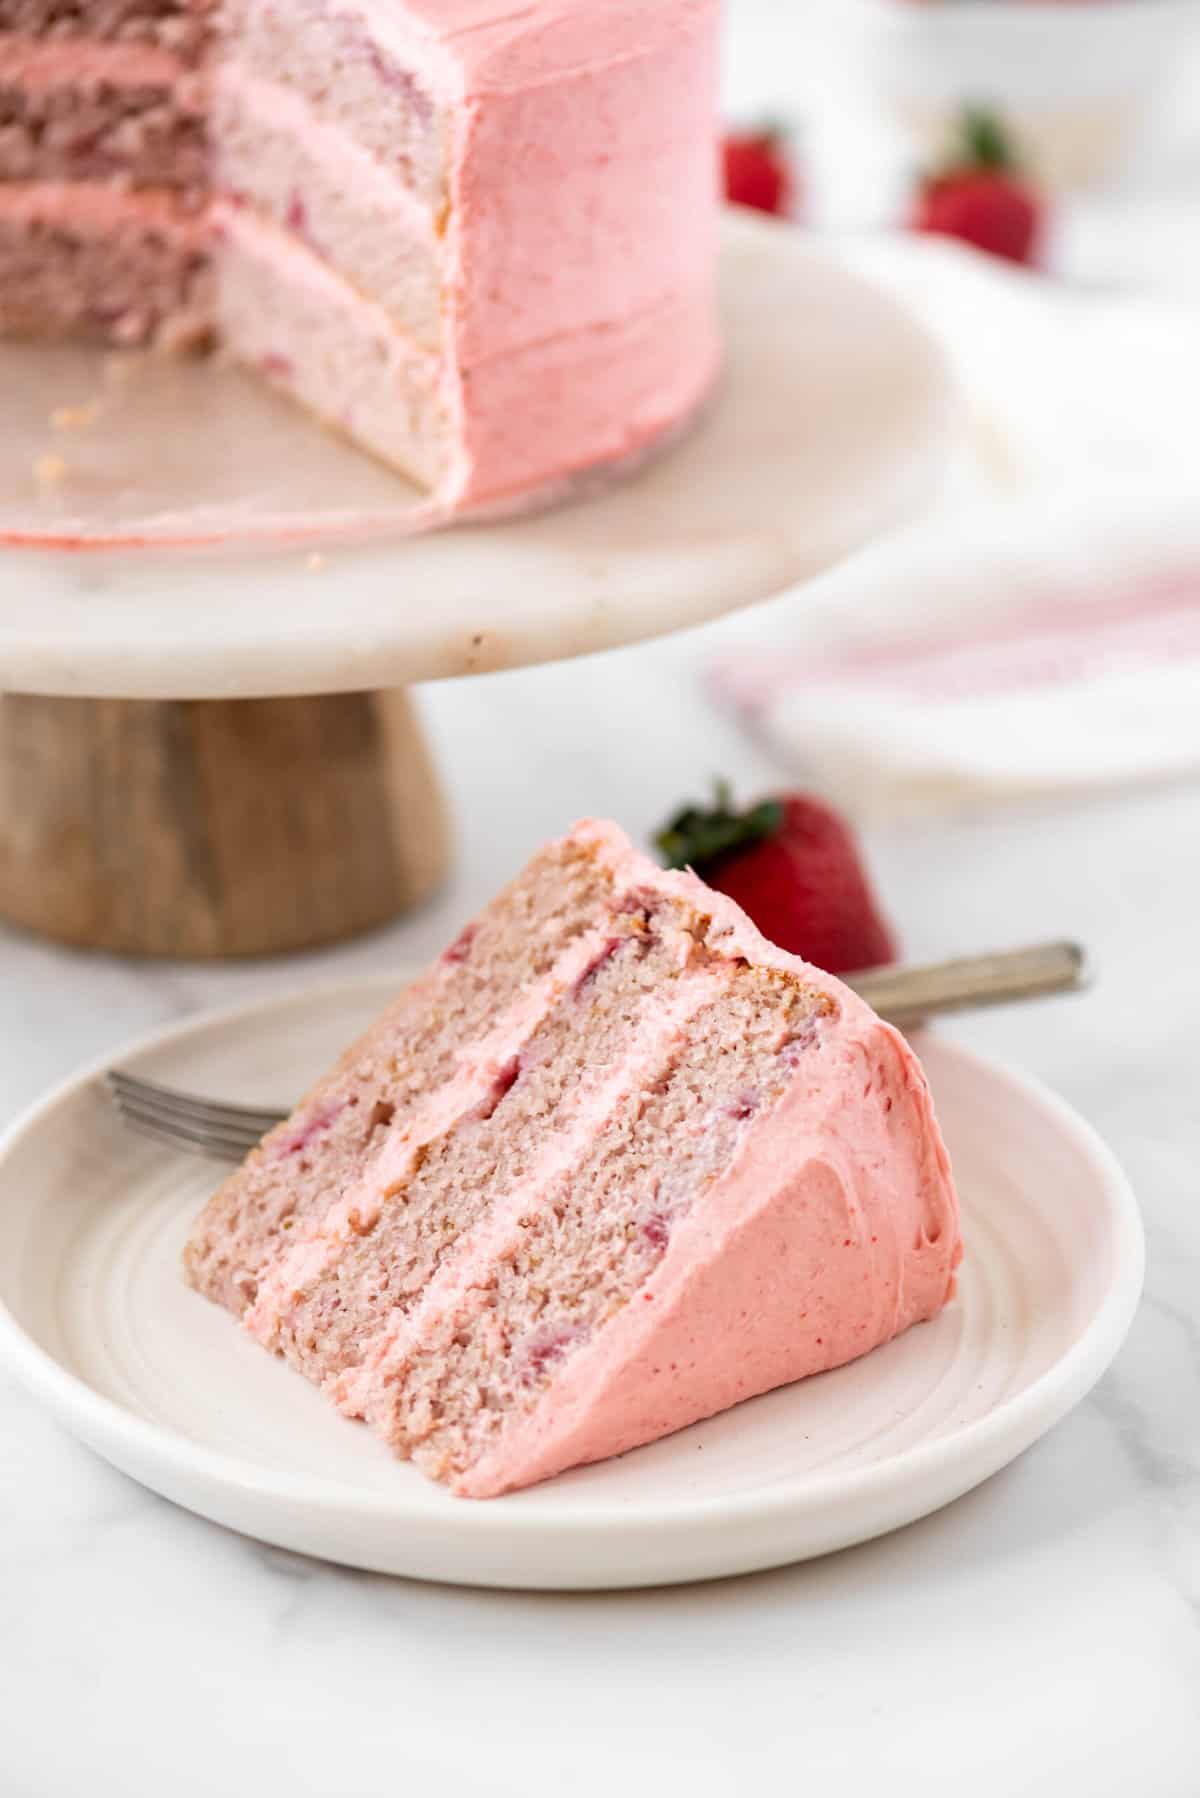 Slice of strawberry cake on a plate with the whole strawberry cake on a cake stand in the background.